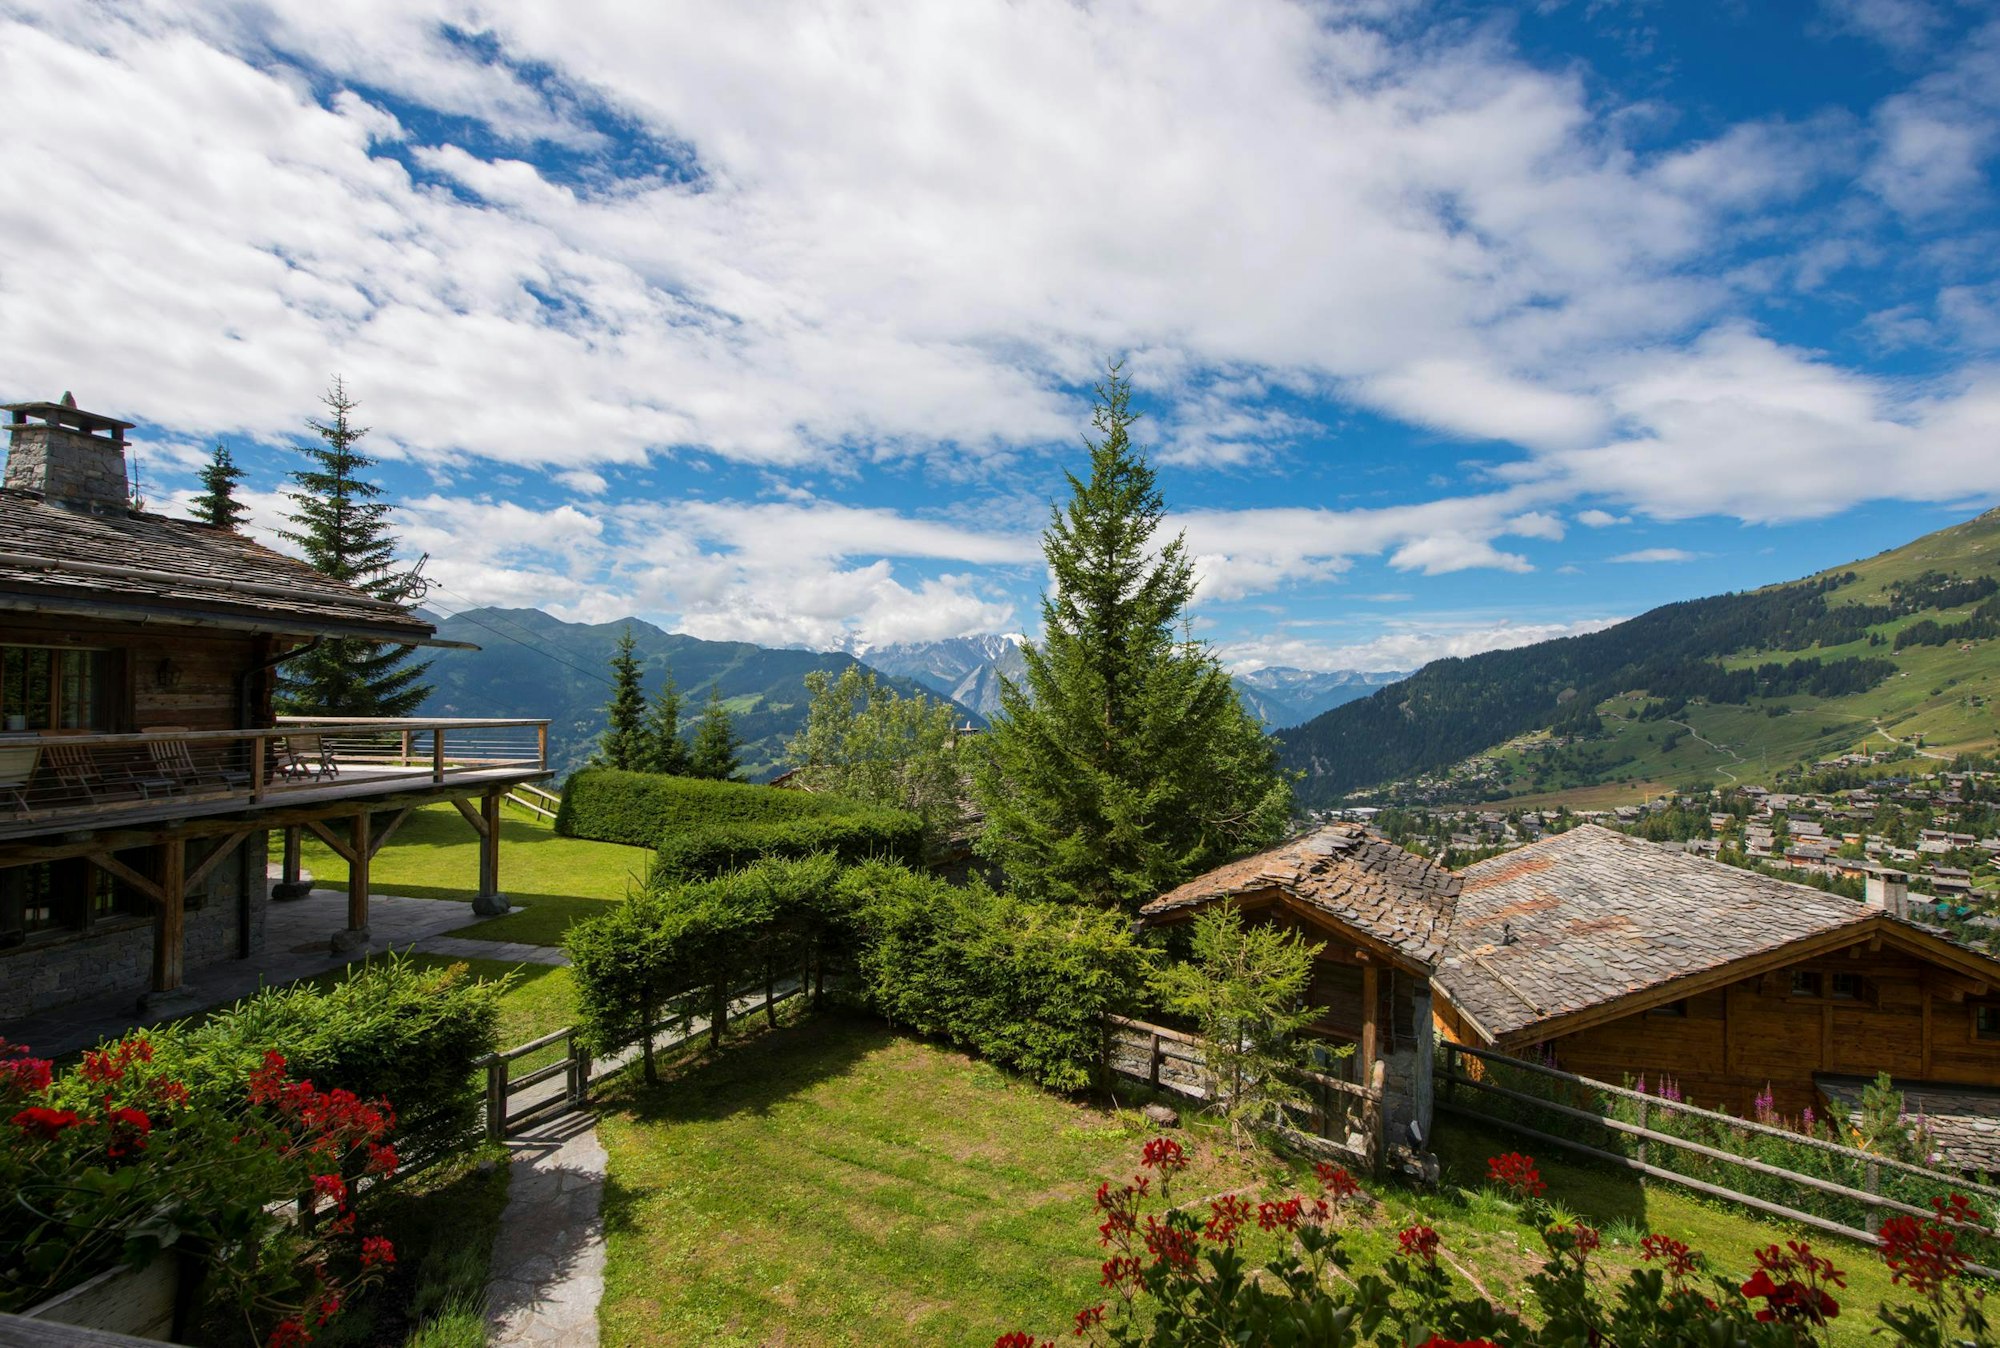 THINGS TO DO IN VERBIER DURING SUMMER